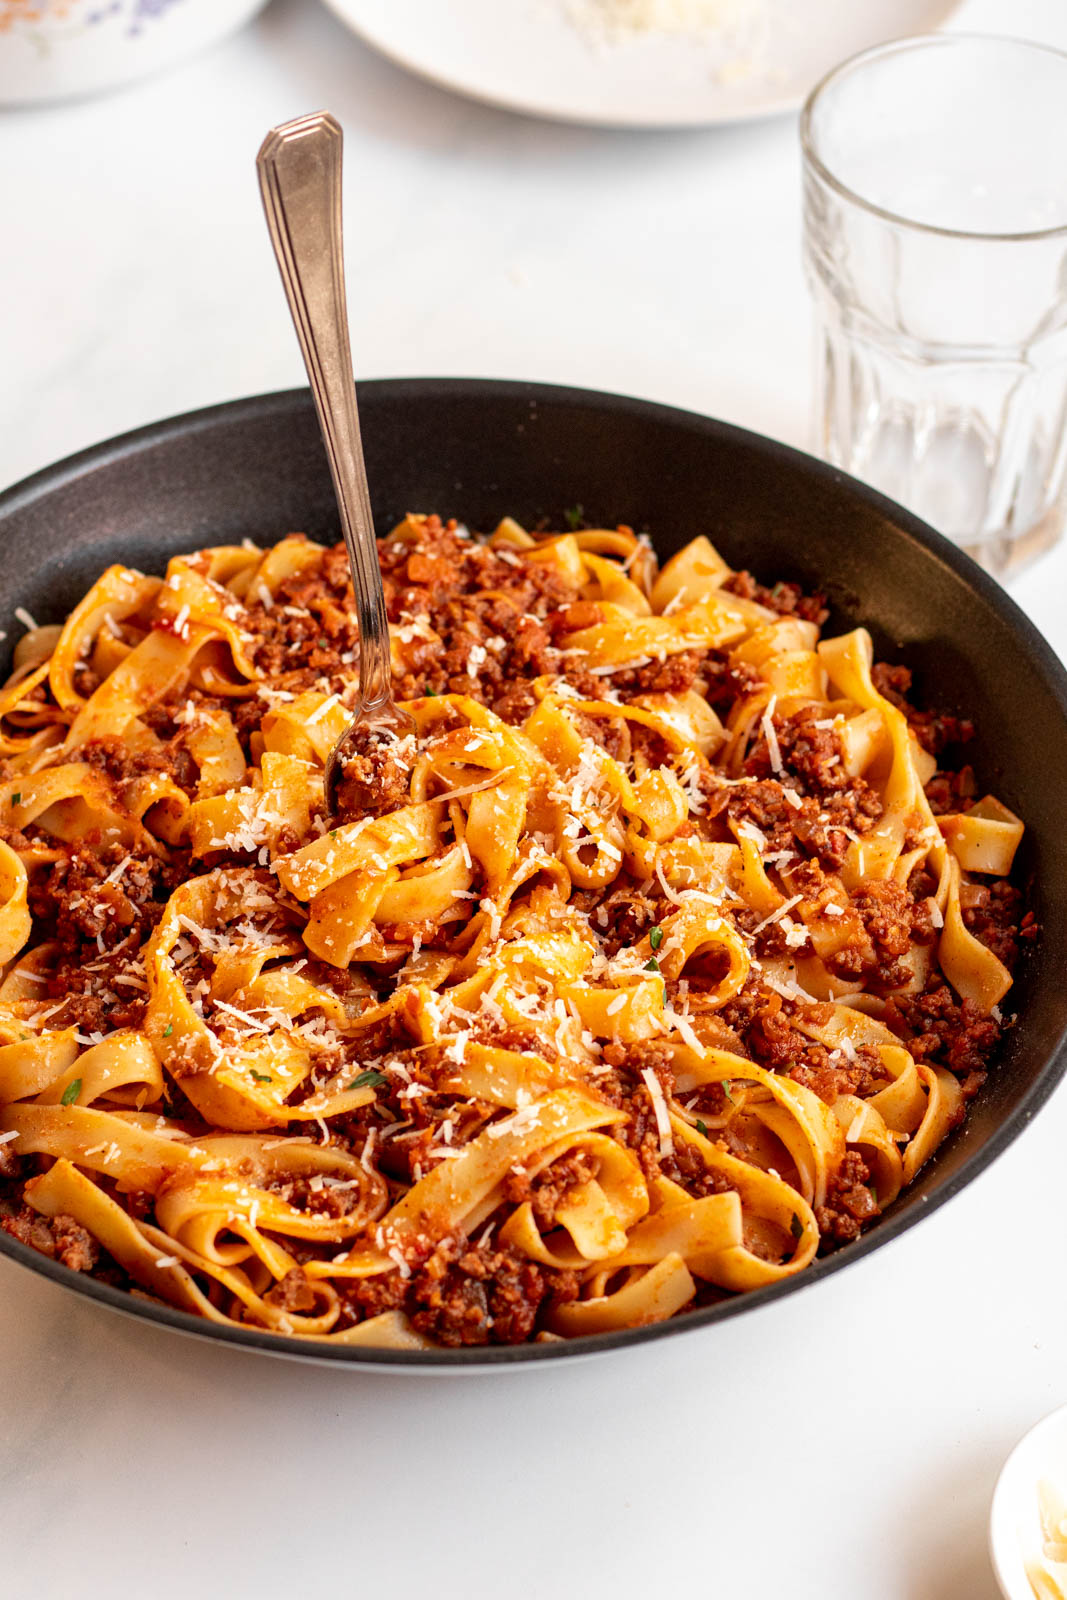 Bolognese sauce with pasta in a pan.